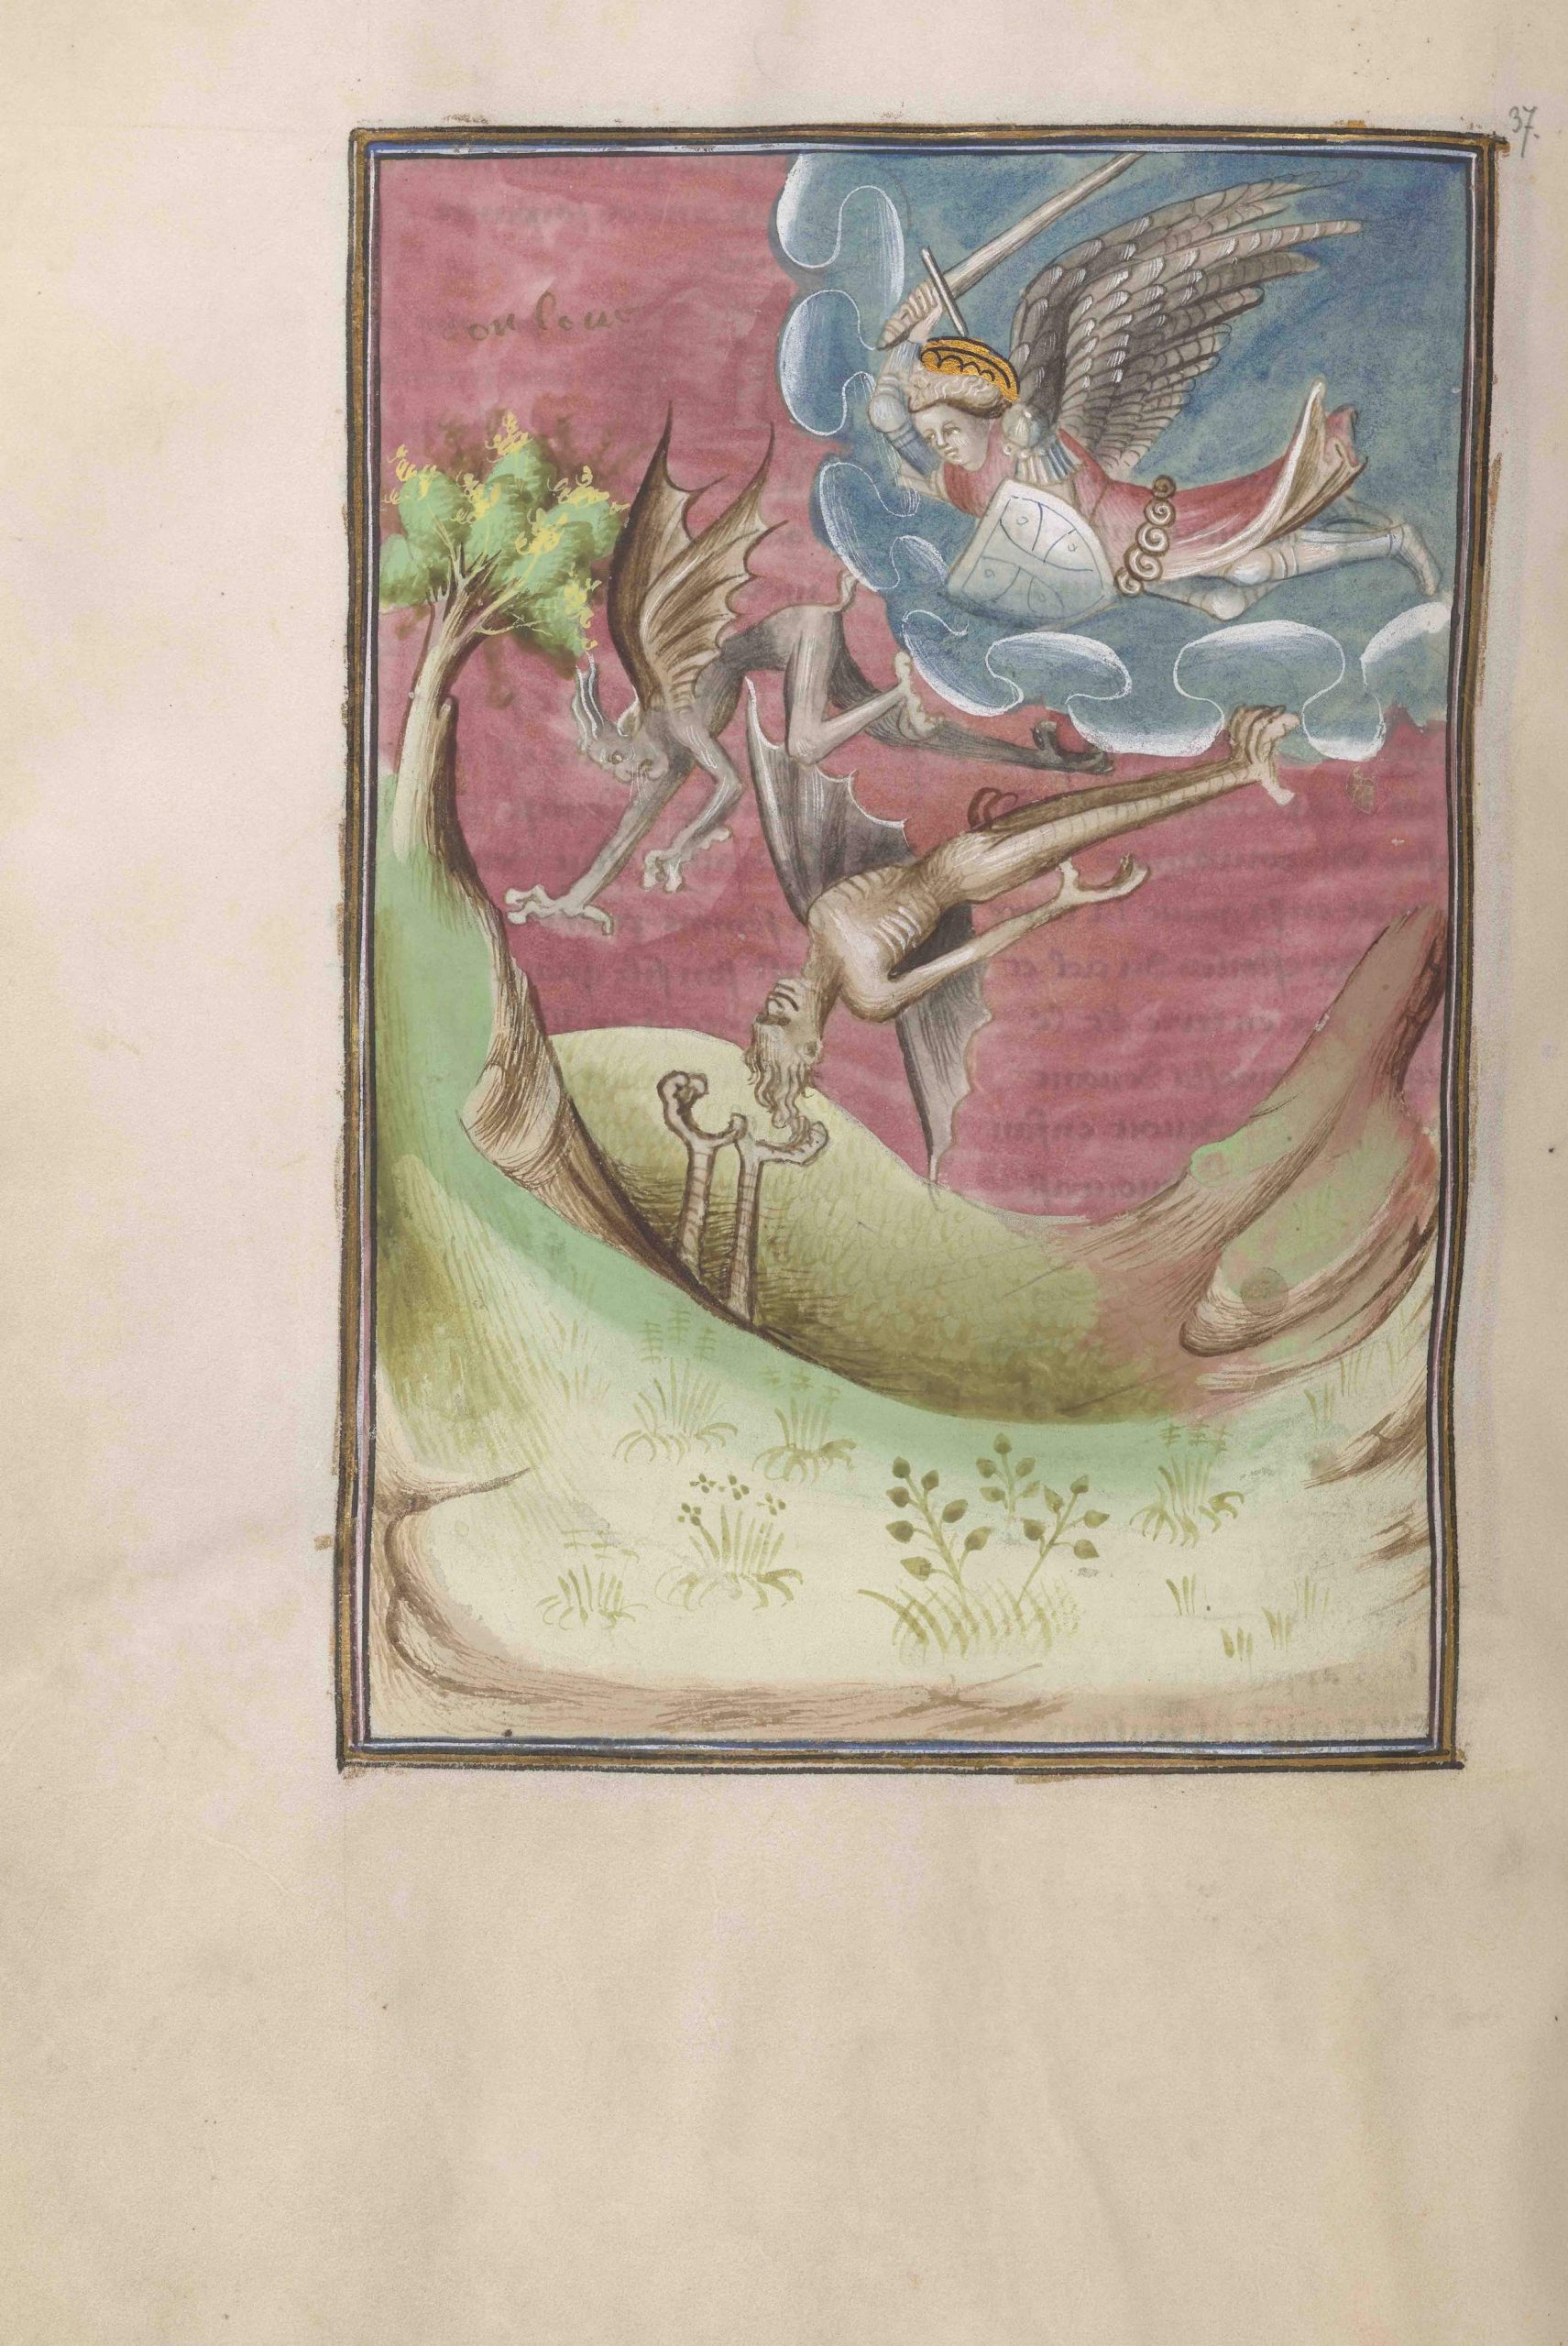 extract from the Berry Apocalypse; folio 37 verso showing archangel Michael fighting the devils